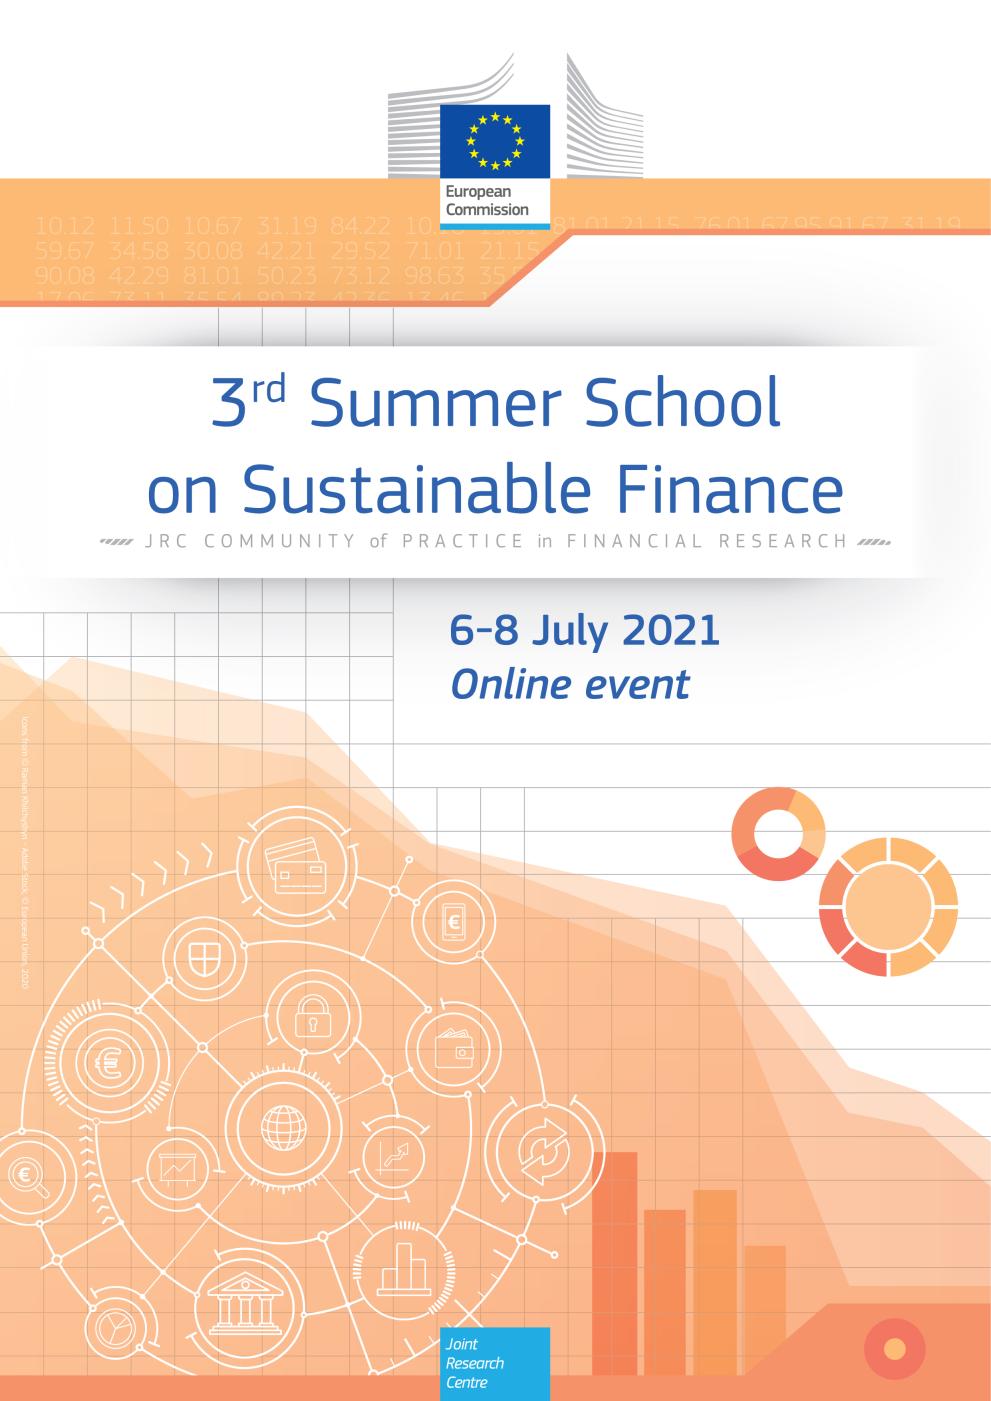 2021_07_06_3rd_summer_school_on_sustainable_finance_a4_generic_cover.jpg